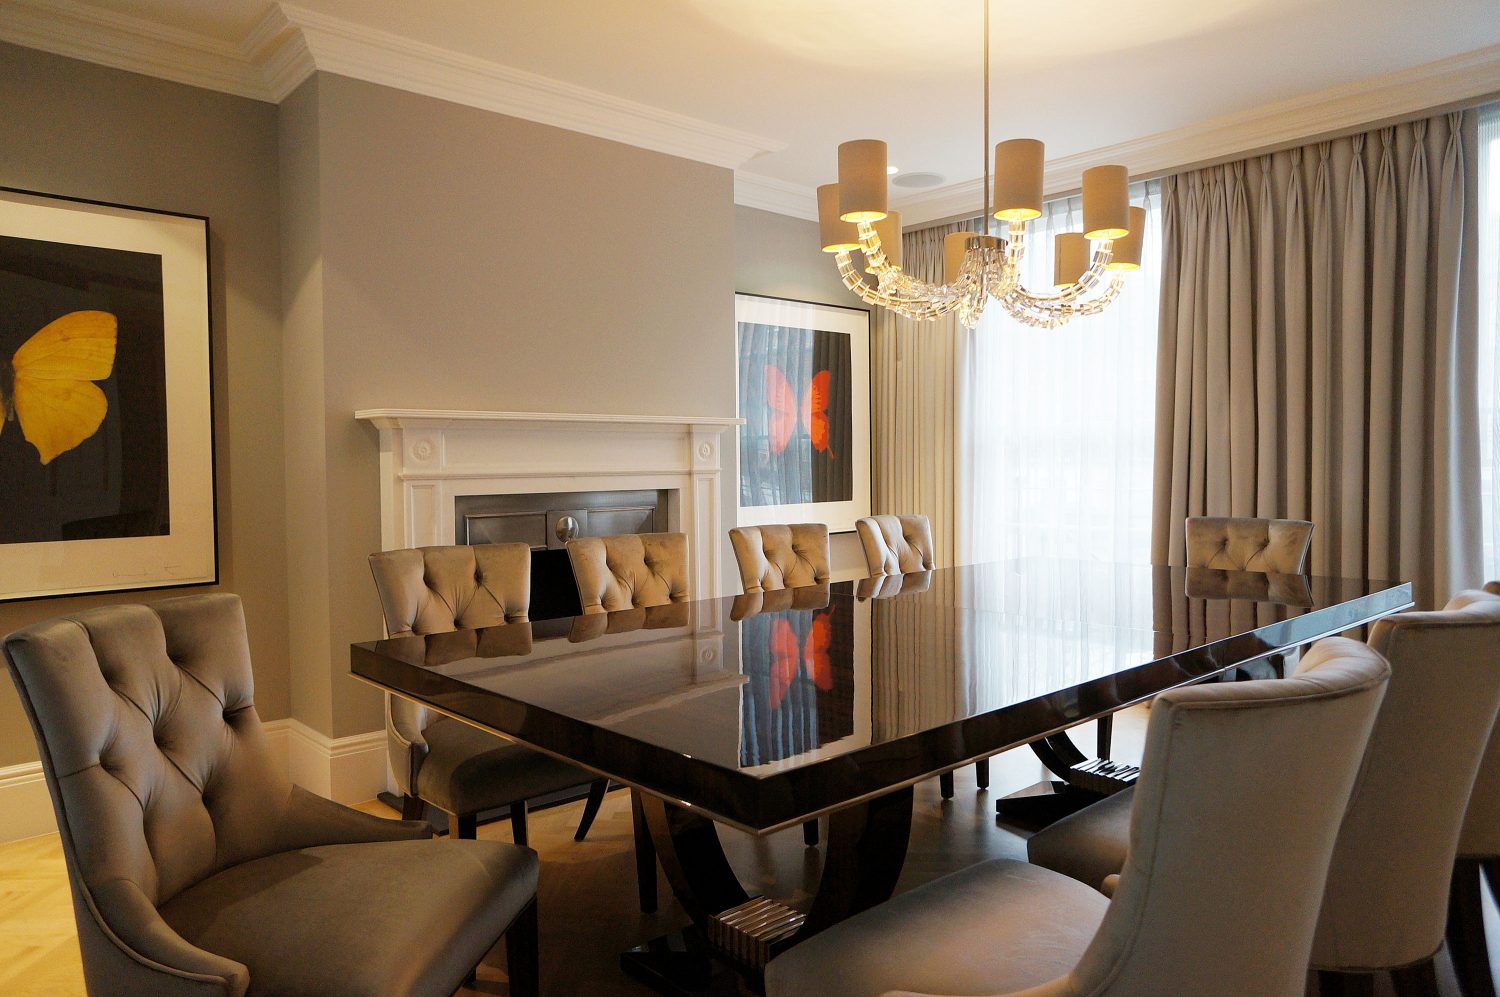 50 Shades by Daniel Hopwood – grey dining room with white accents. High end interior design, London